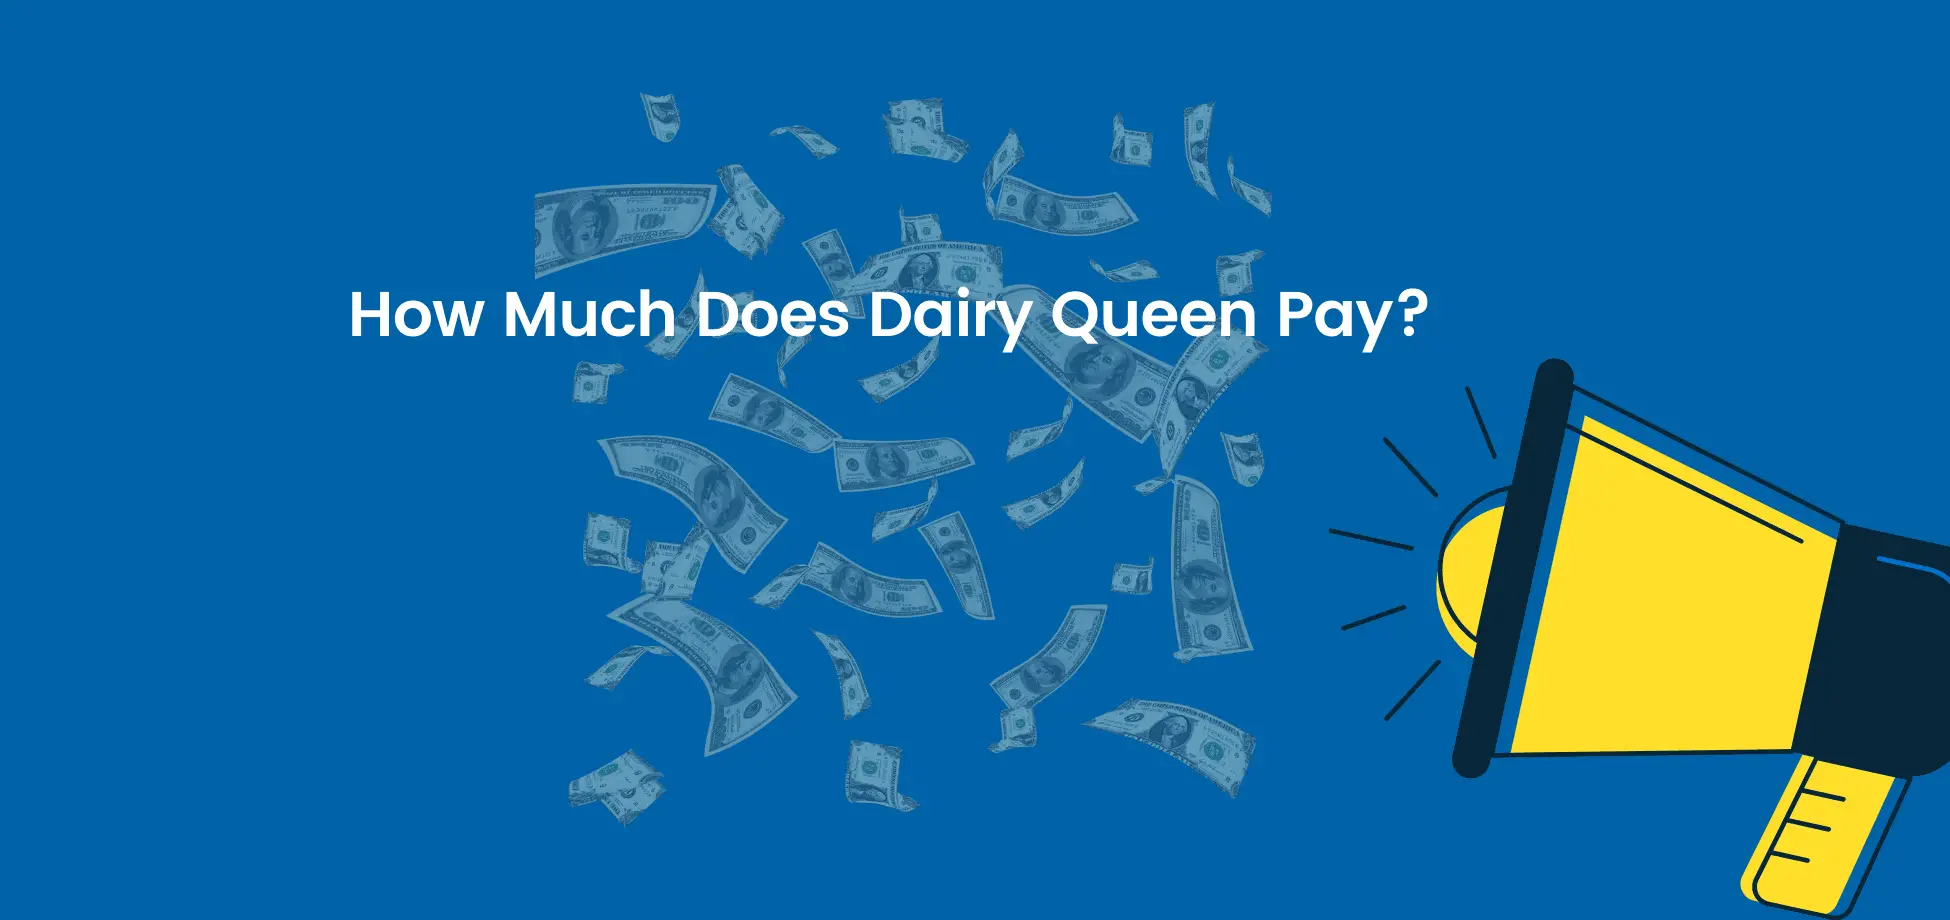 Dairy Queen salaries vary greatly from store to store when it comes to starting and average pay.